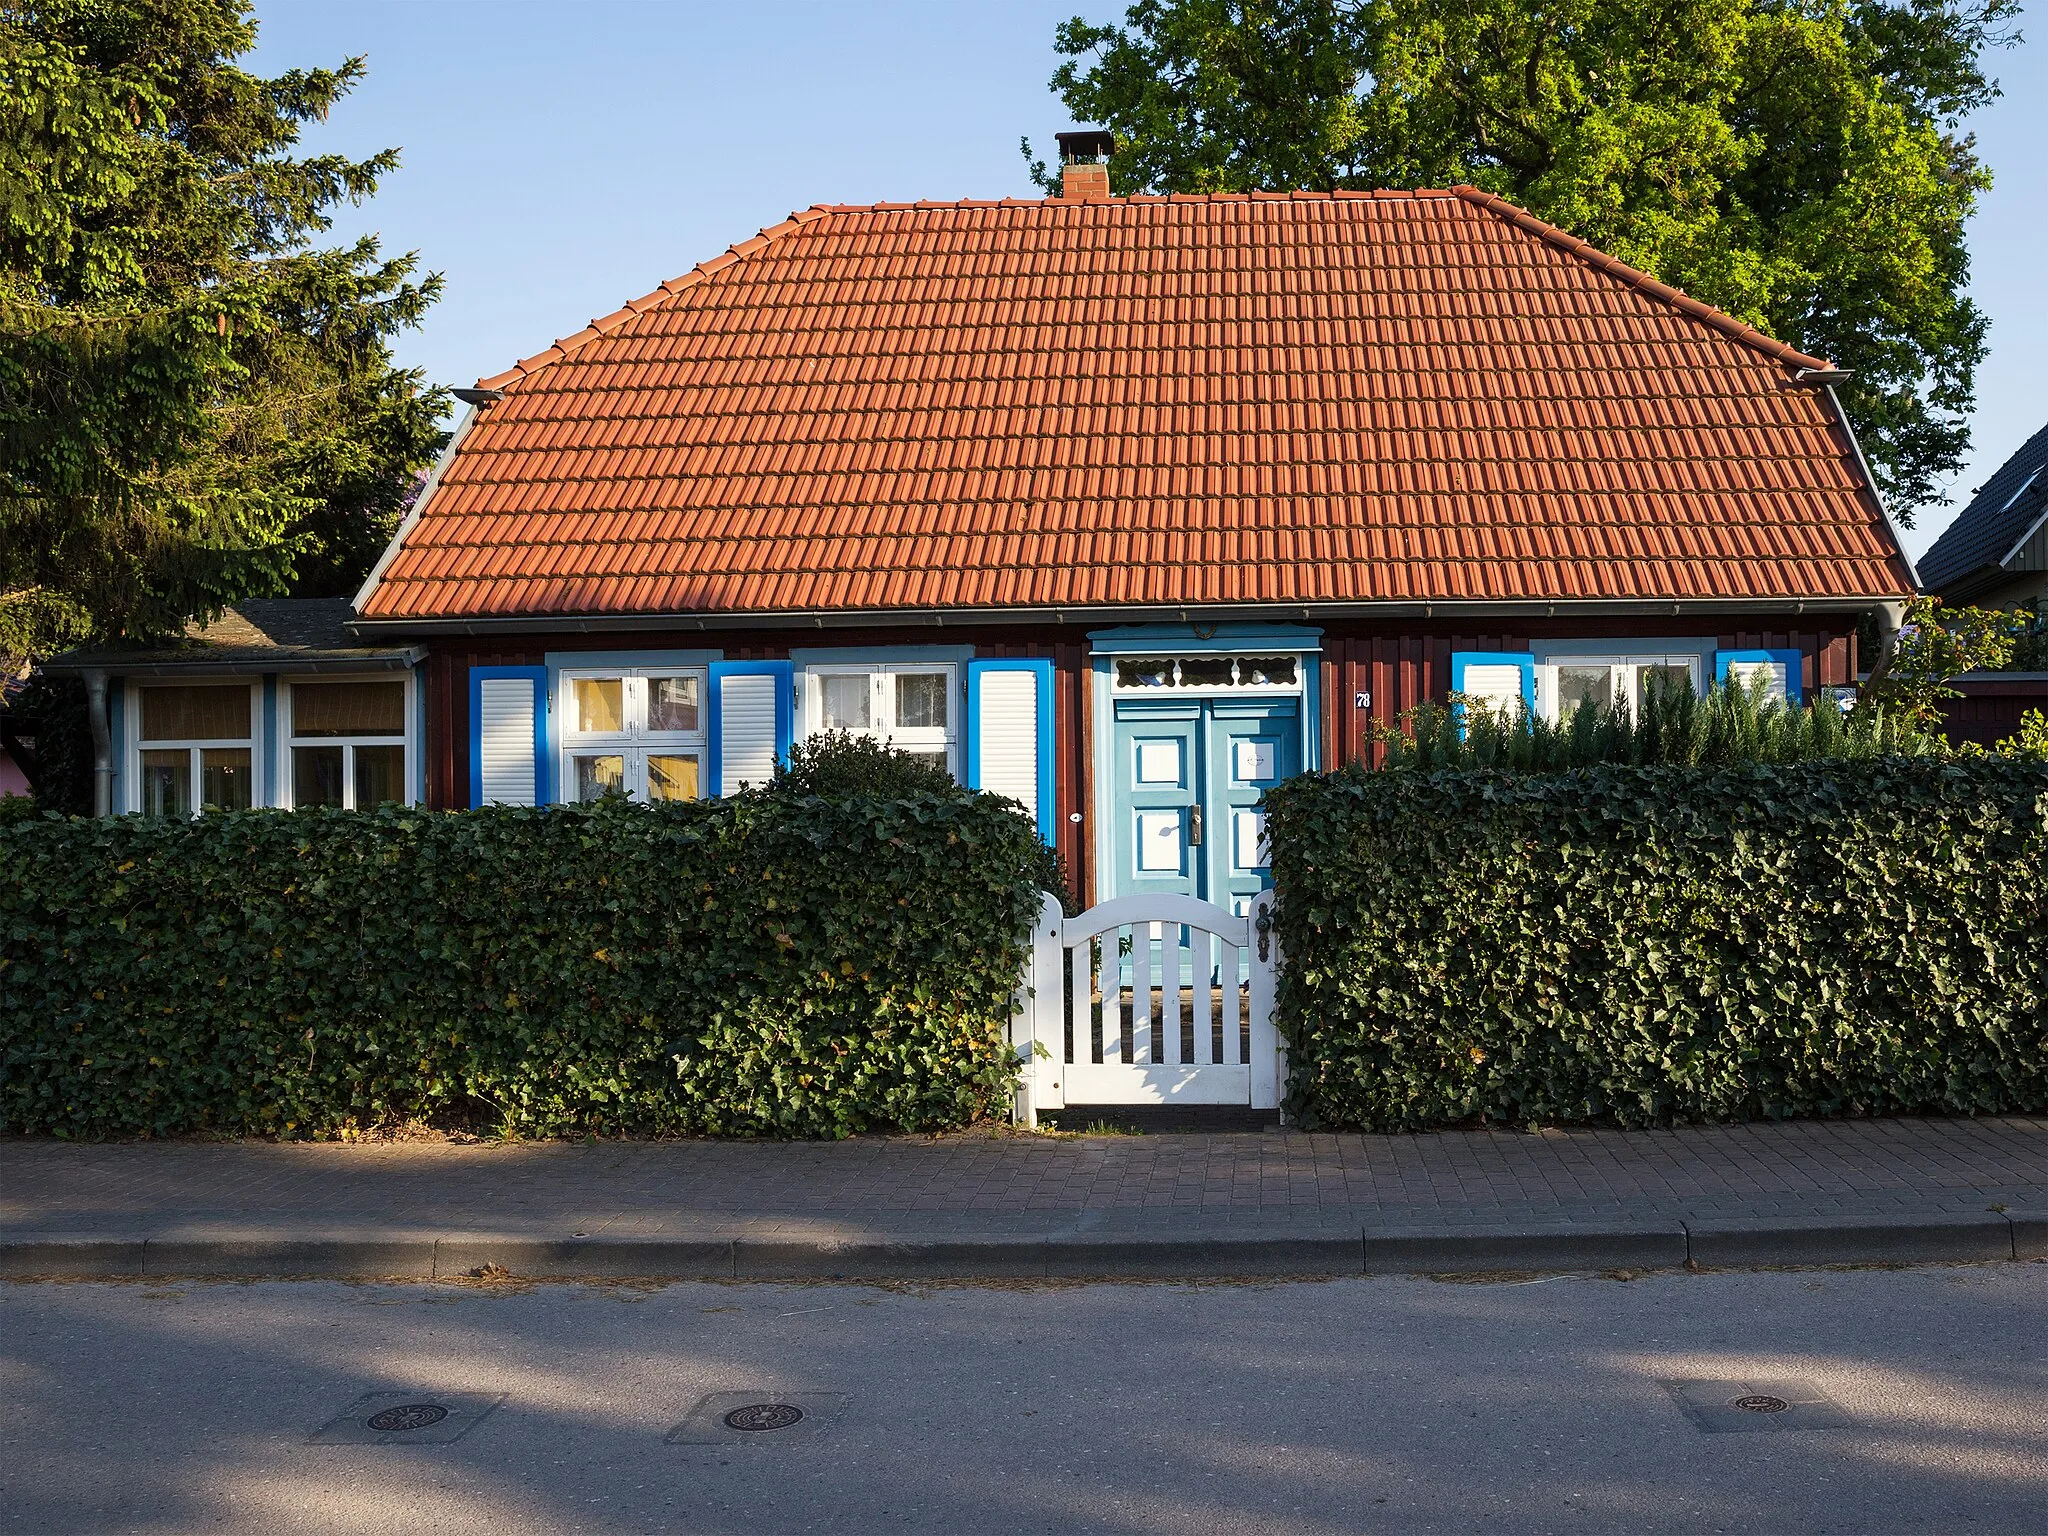 Photo showing: Prerow, Lange Strasse 78, cultural heritage monument